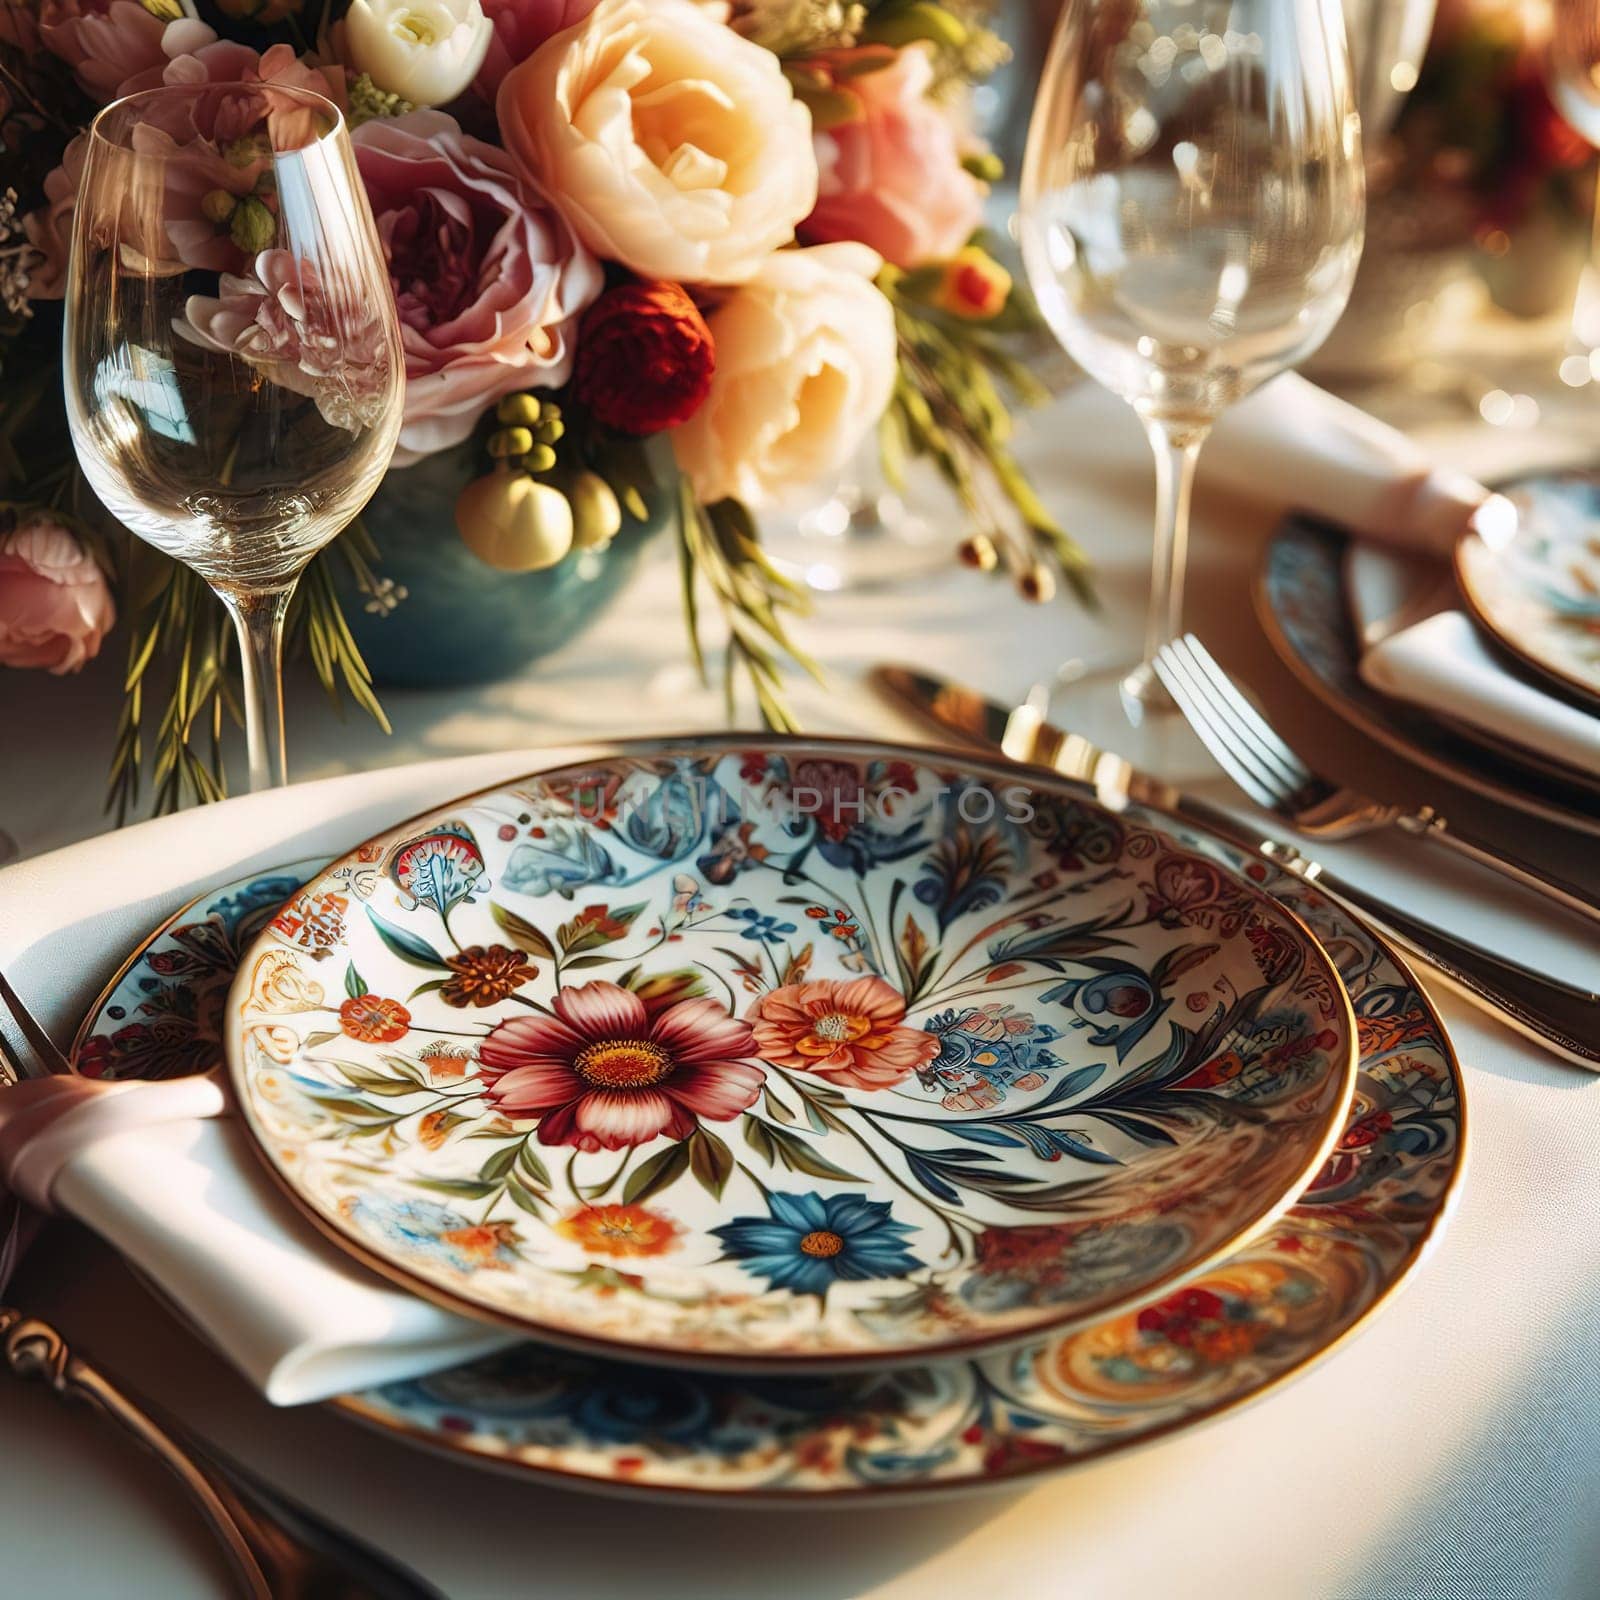 Beautifully set table for a romantic dinner by gordiza